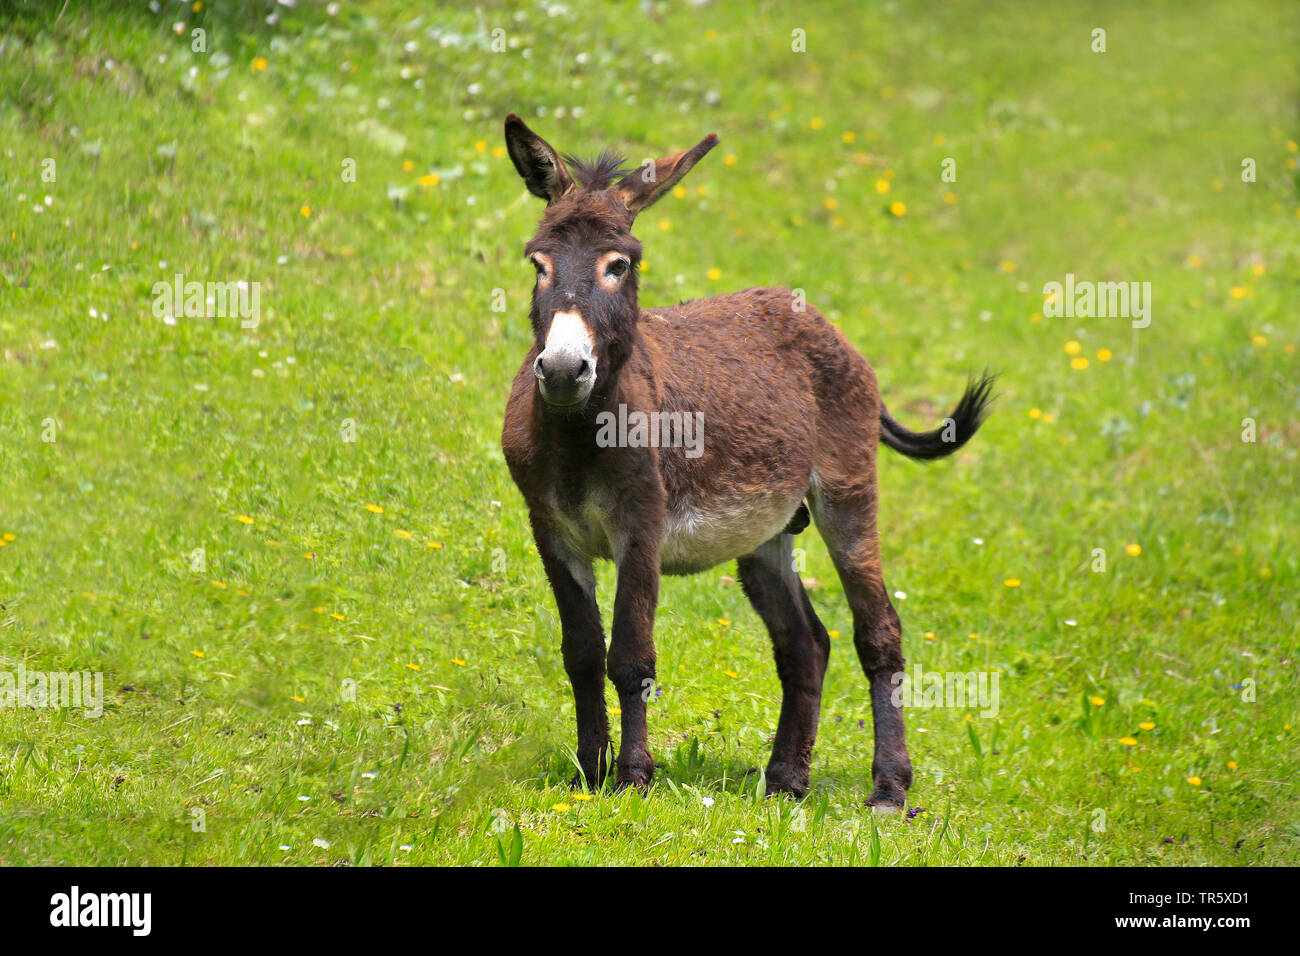 Domestic donkey (Equus asinus asinus), standing on a meadow, Germany Stock Photo